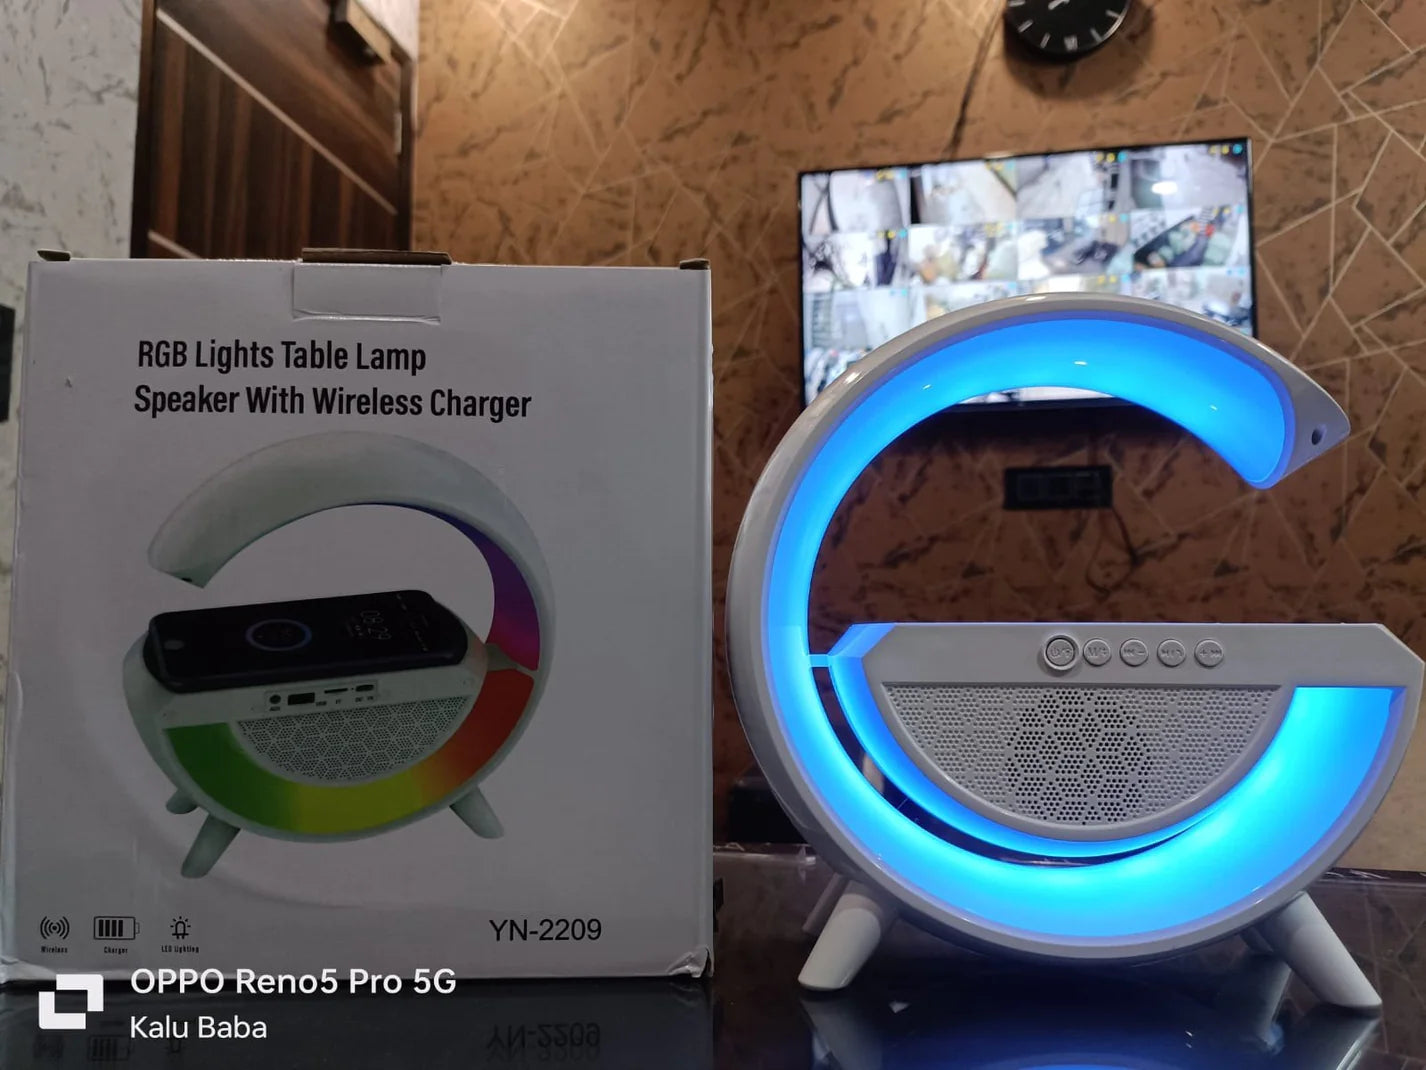 G Shaped RGB Light Table Lamp With Wireless Charger